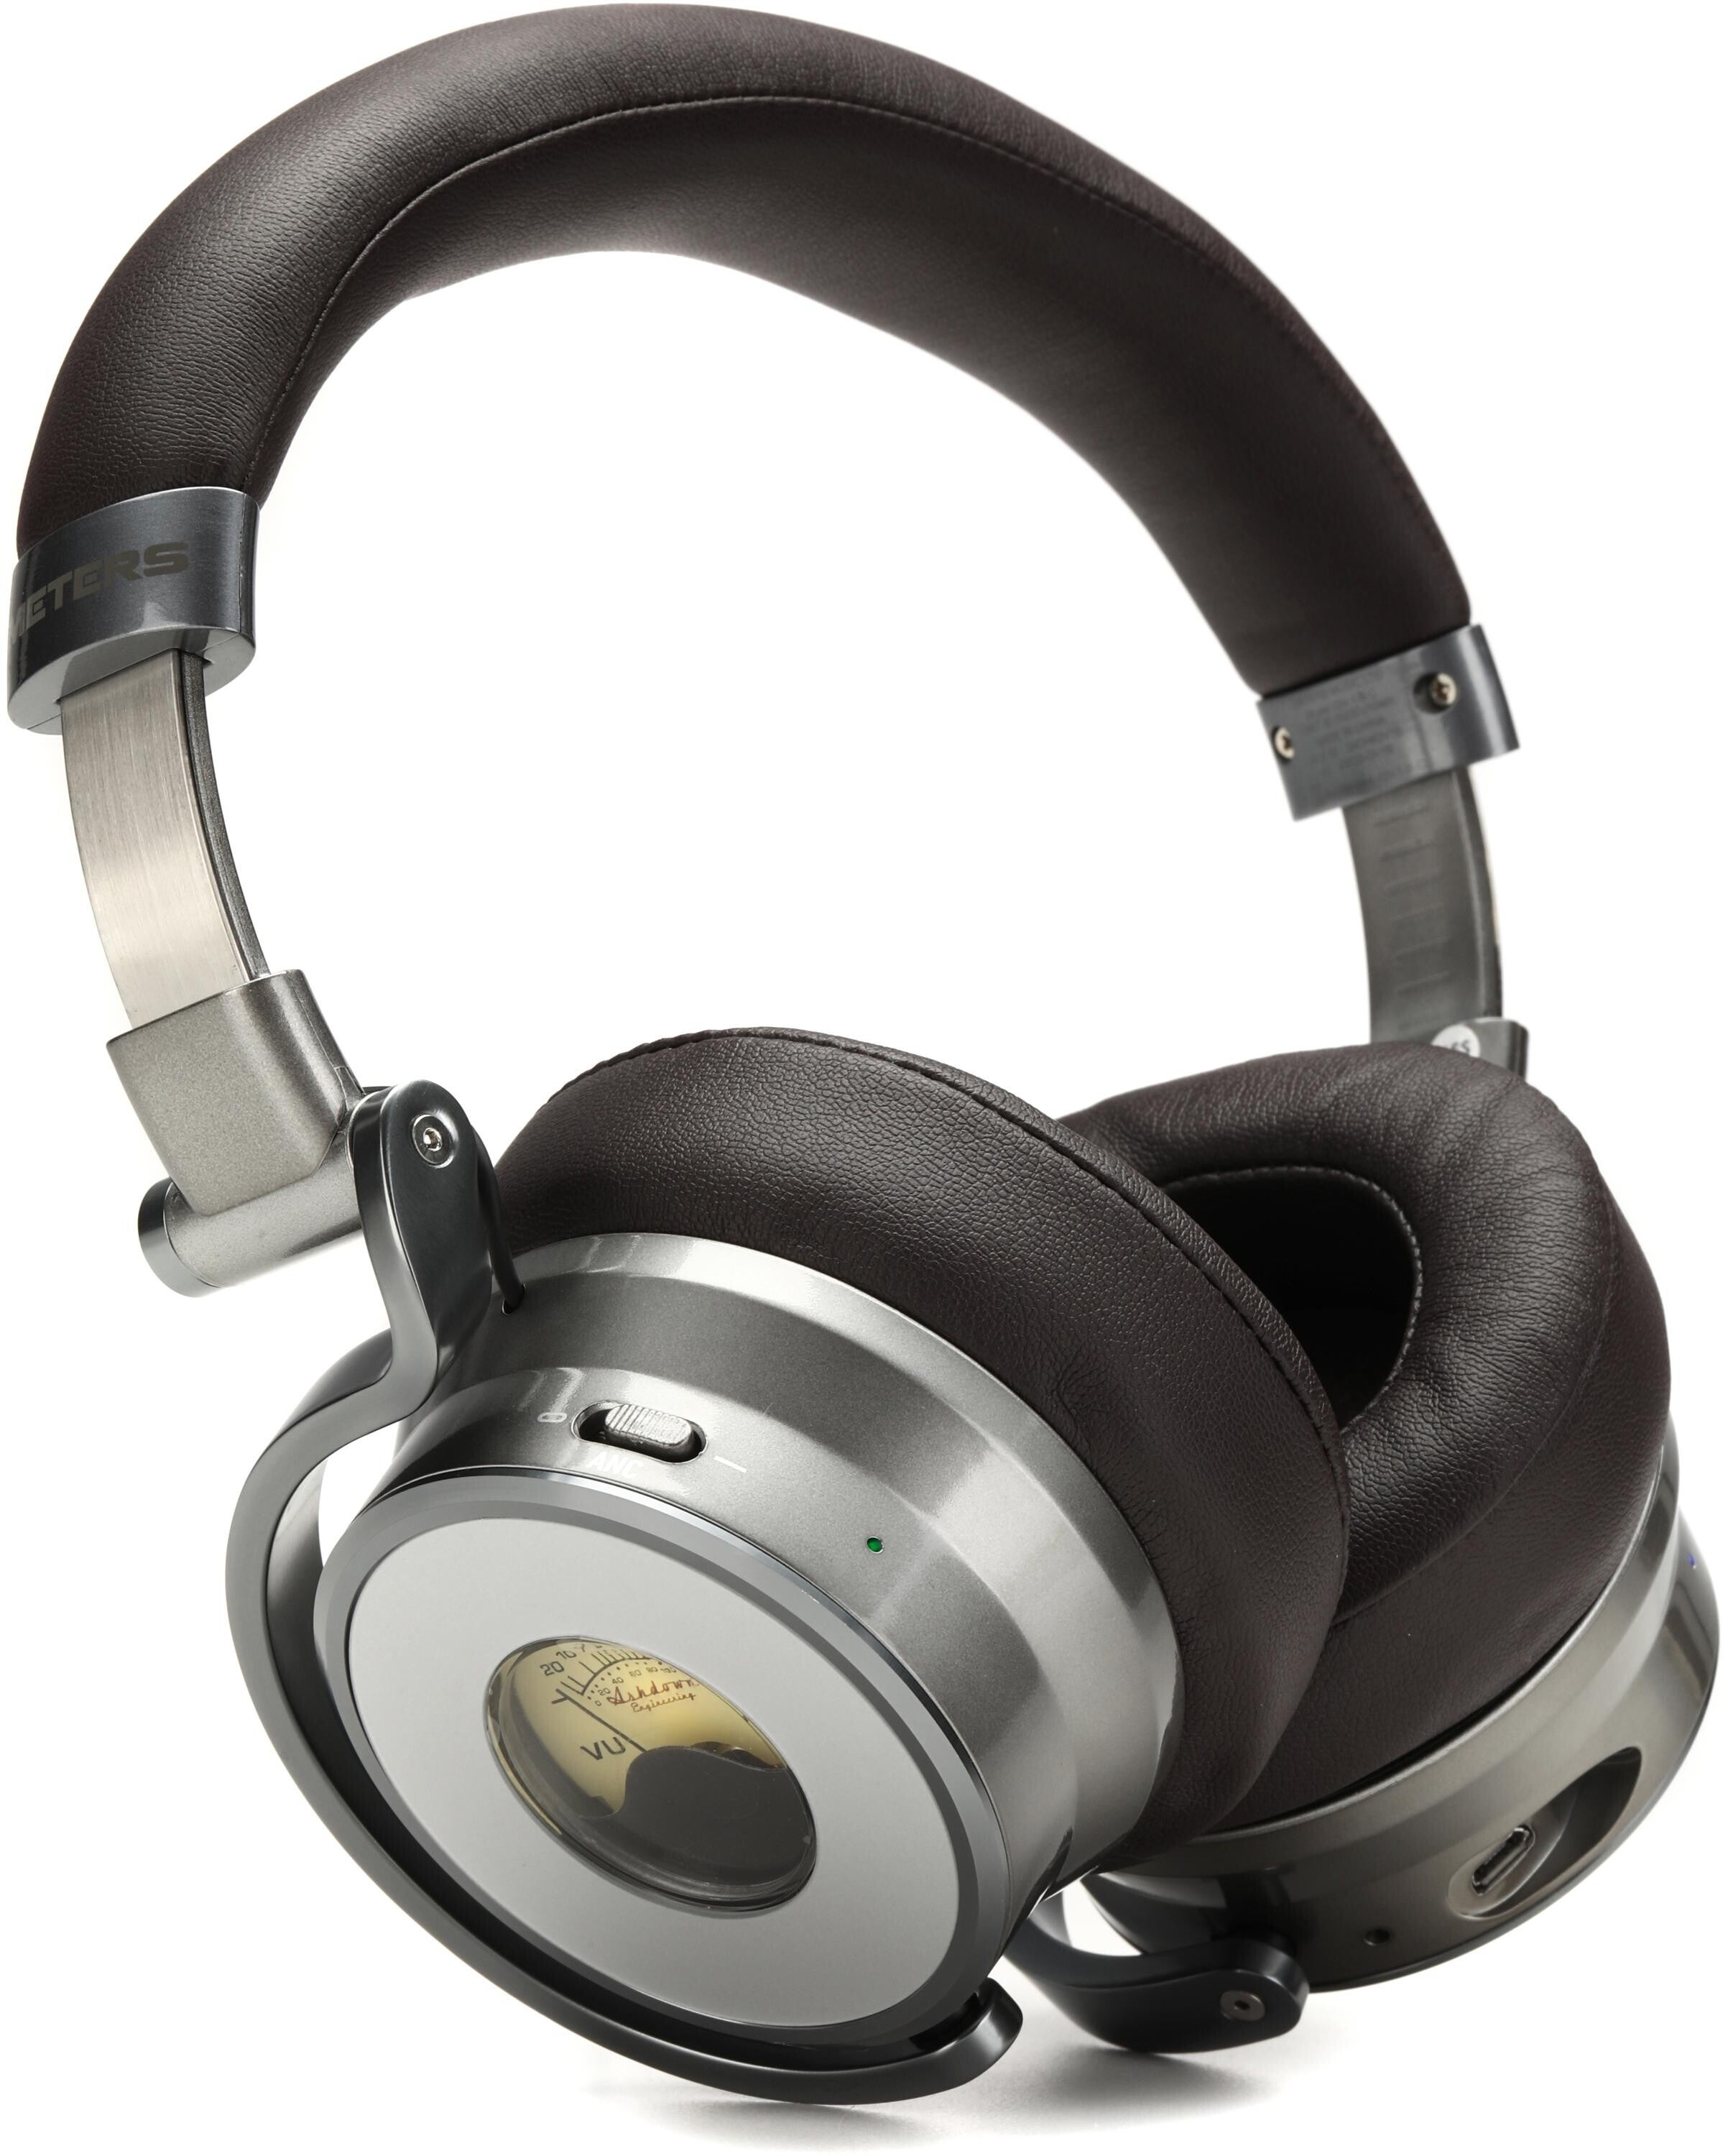 Meters OV-1-B-Connect Editions Over-ear Active Noise Canceling